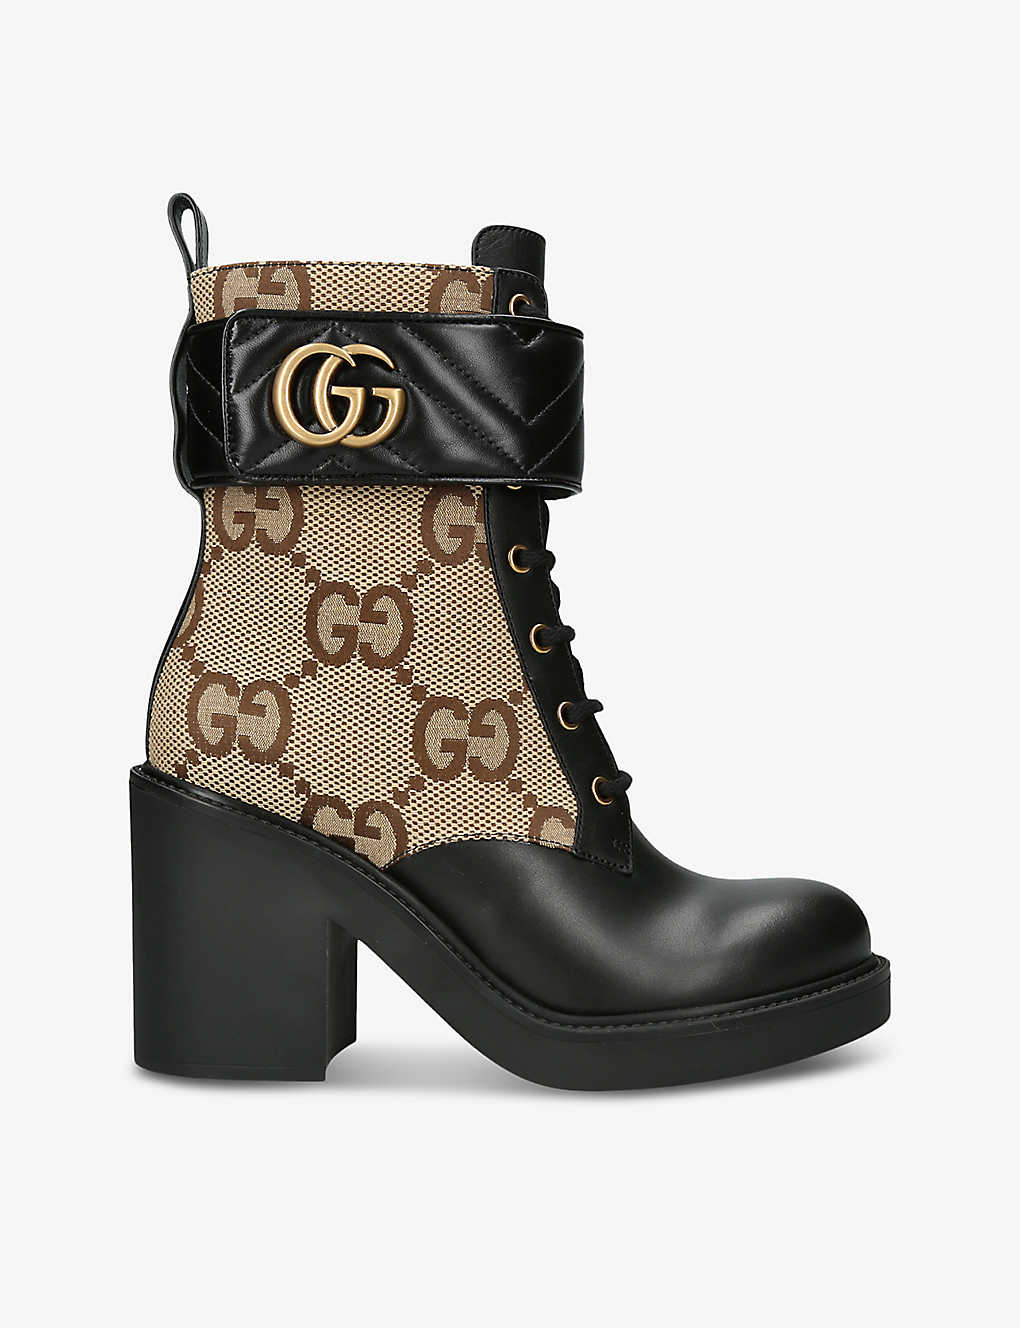 GUCCI GUCCI WOMEN'S BLK/BROWN MARMONT LOGO-PRINT LEATHER HEELED ANKLE BOOTS